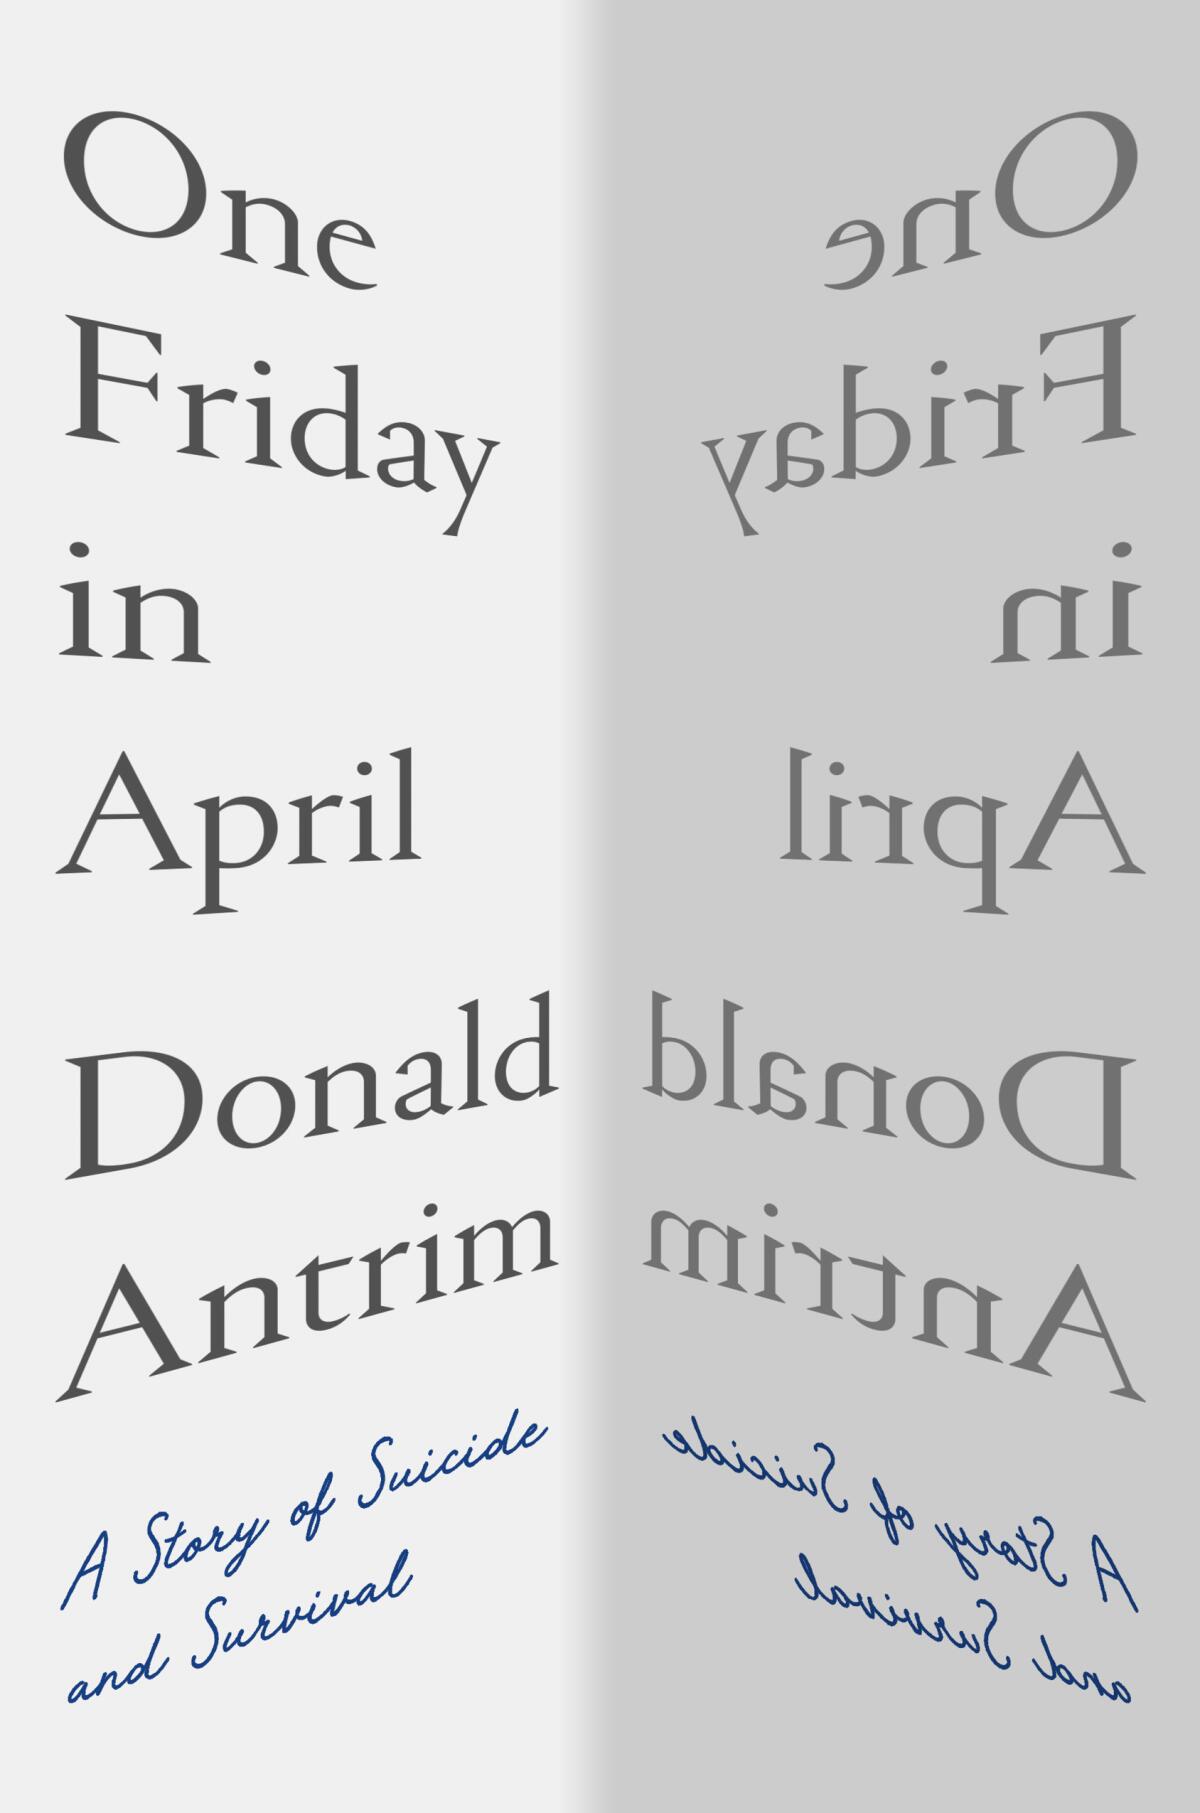 "One Friday in April," by Donald Antrim